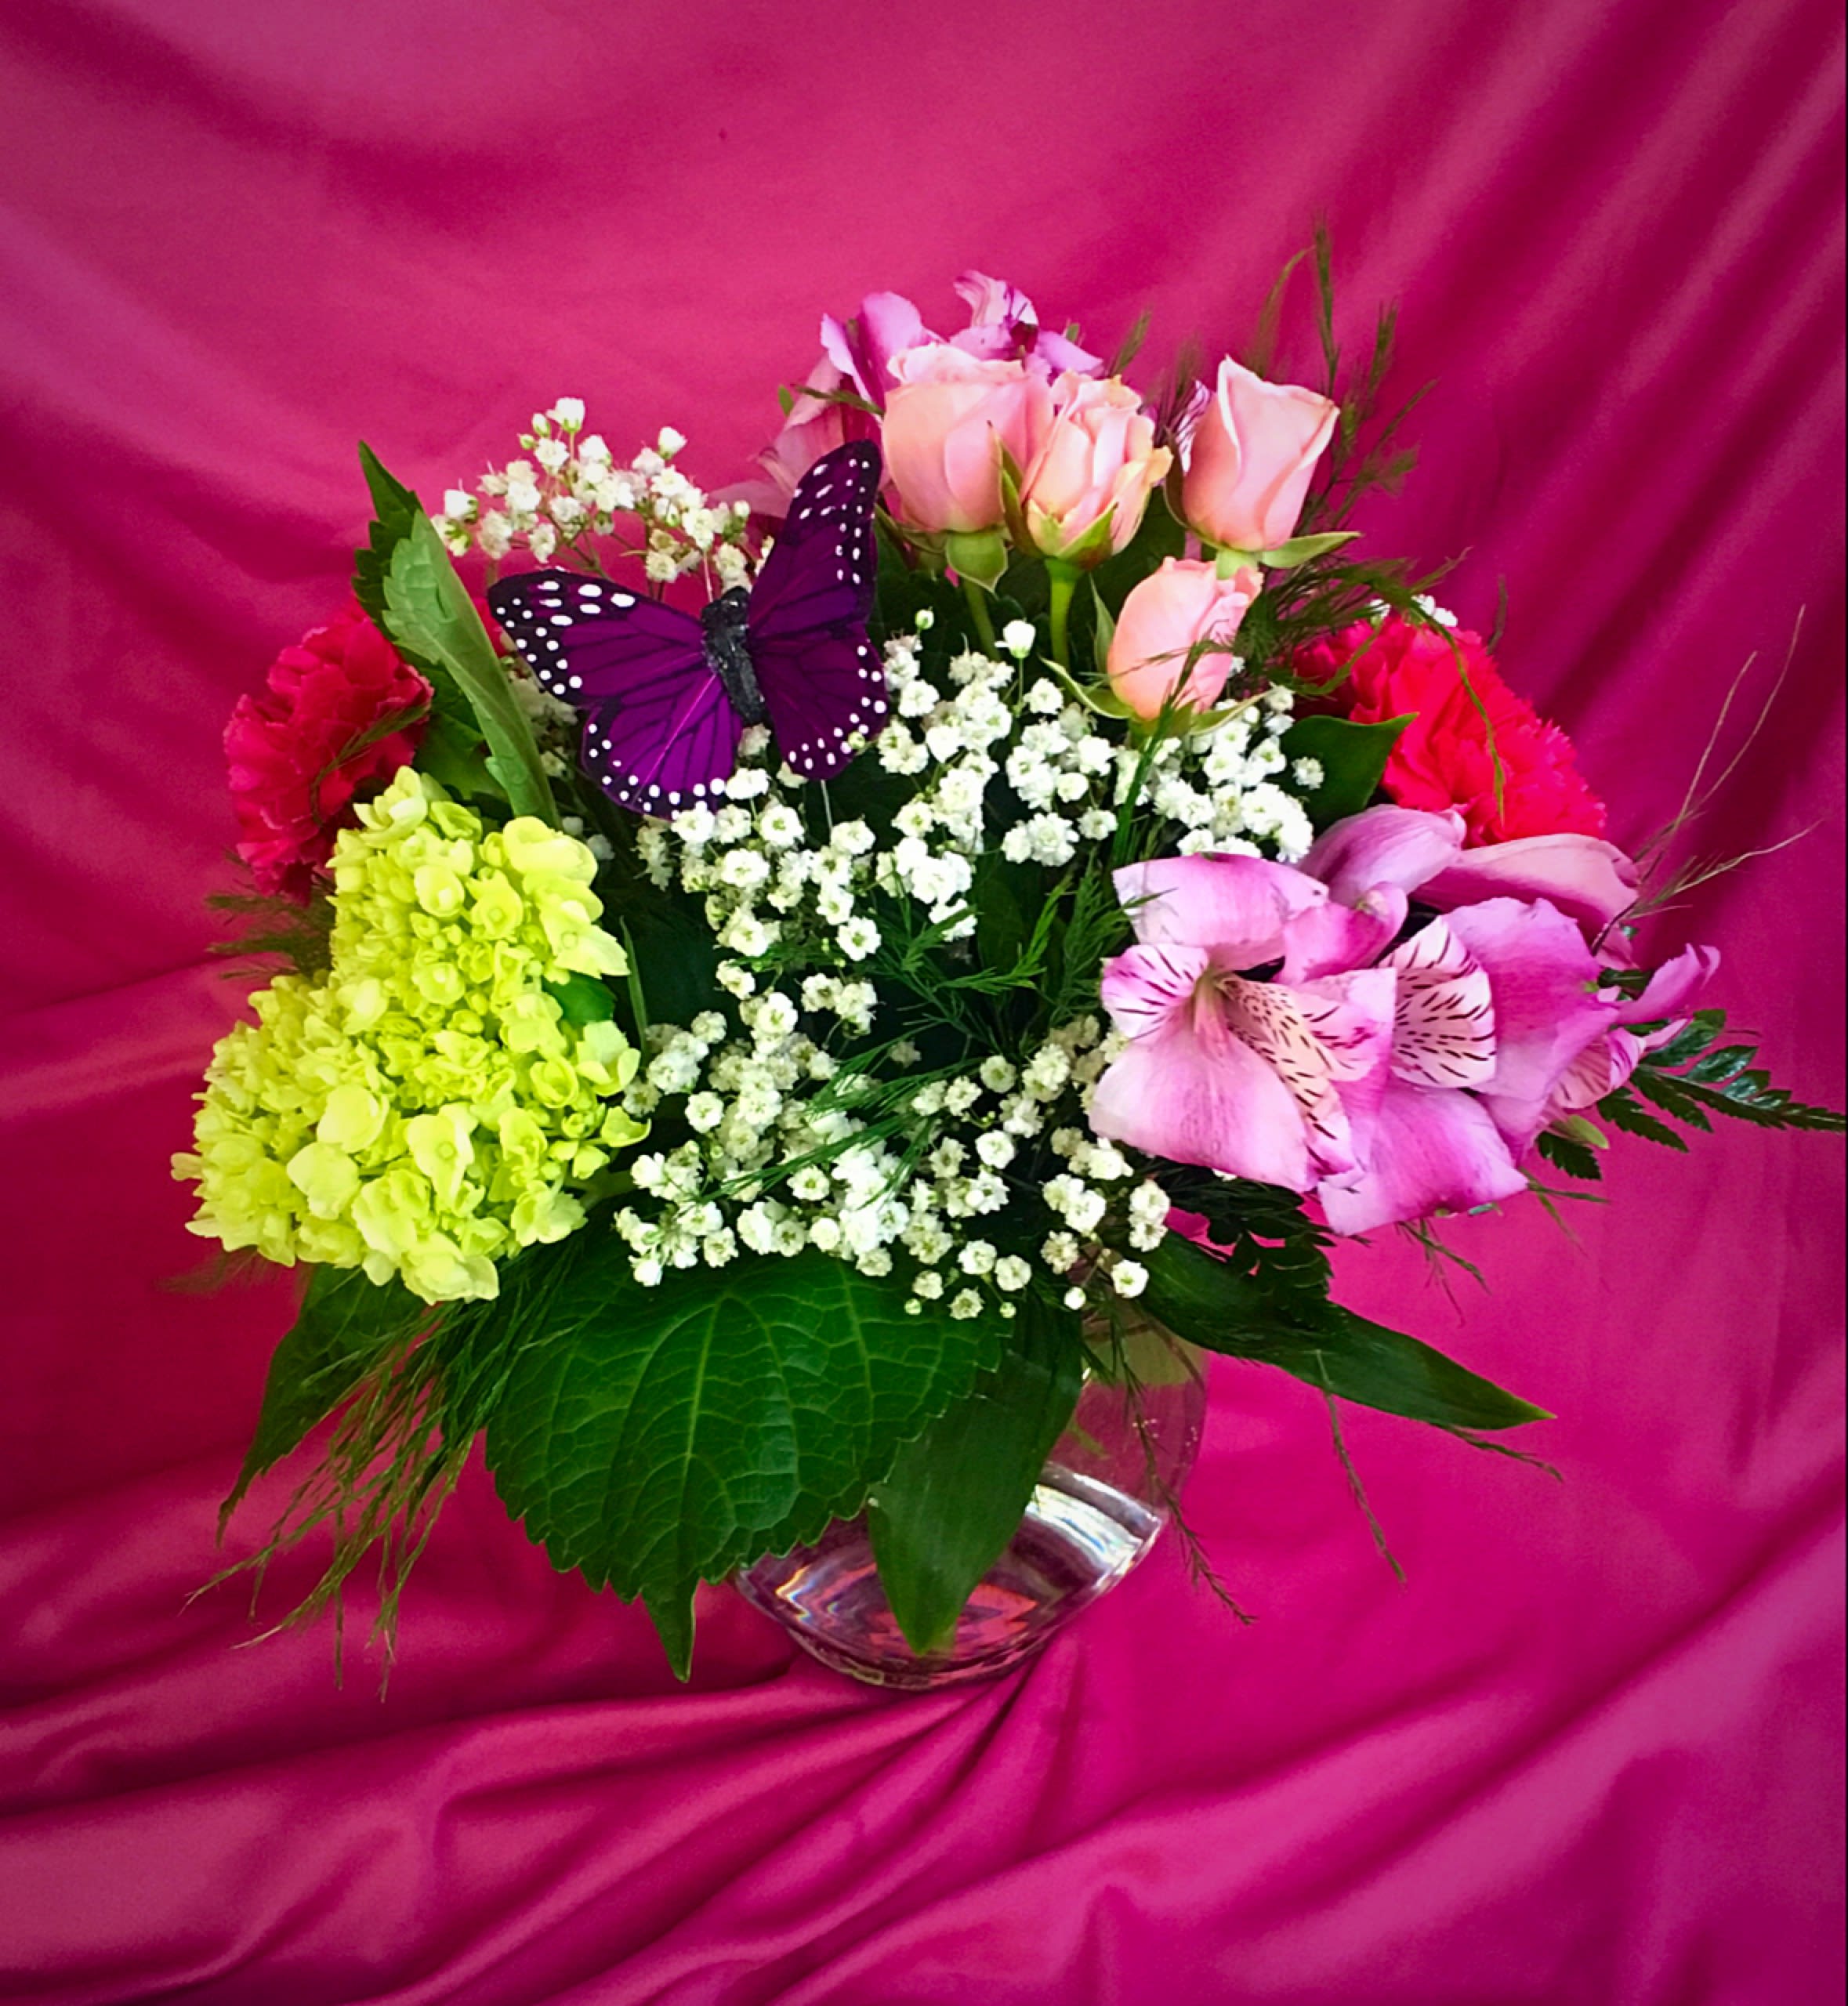 Summer in Paris Bouquet - This beautiful fresh arrangement is inspired by our head designer's trip to Europe, more specifically Paris, France. Send this artful combination of roses, alstroemeria, carnations, and hydrangea for a vibrant experience of a Parisian flower market. Colors and flowers may vary depending on availability. 